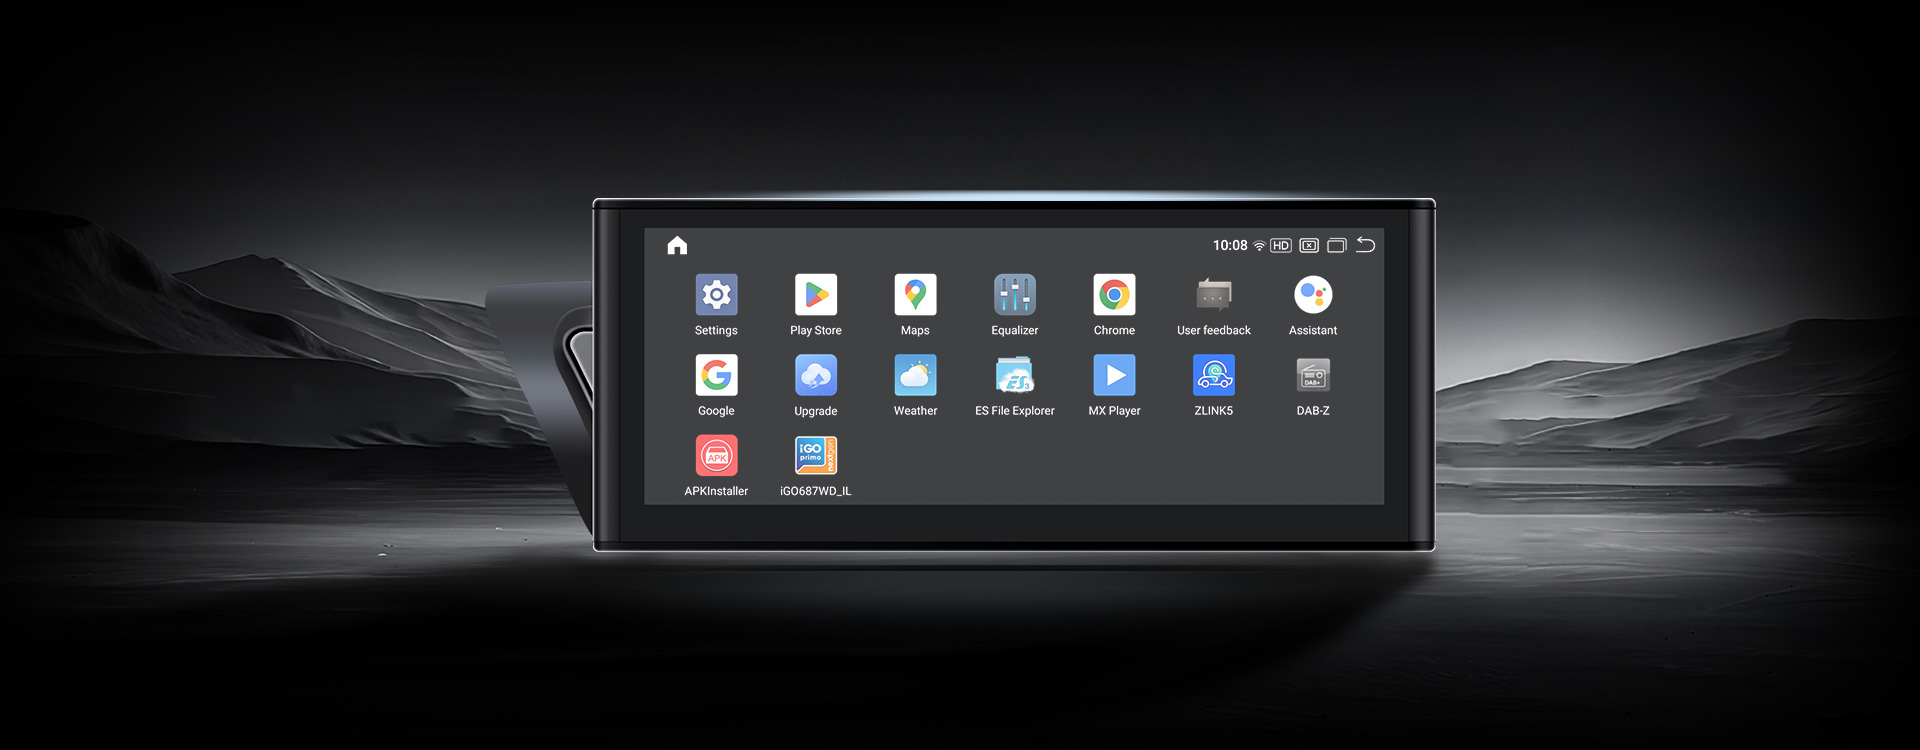 Abdroid-for-audi-10.25-12.3inch-banner3